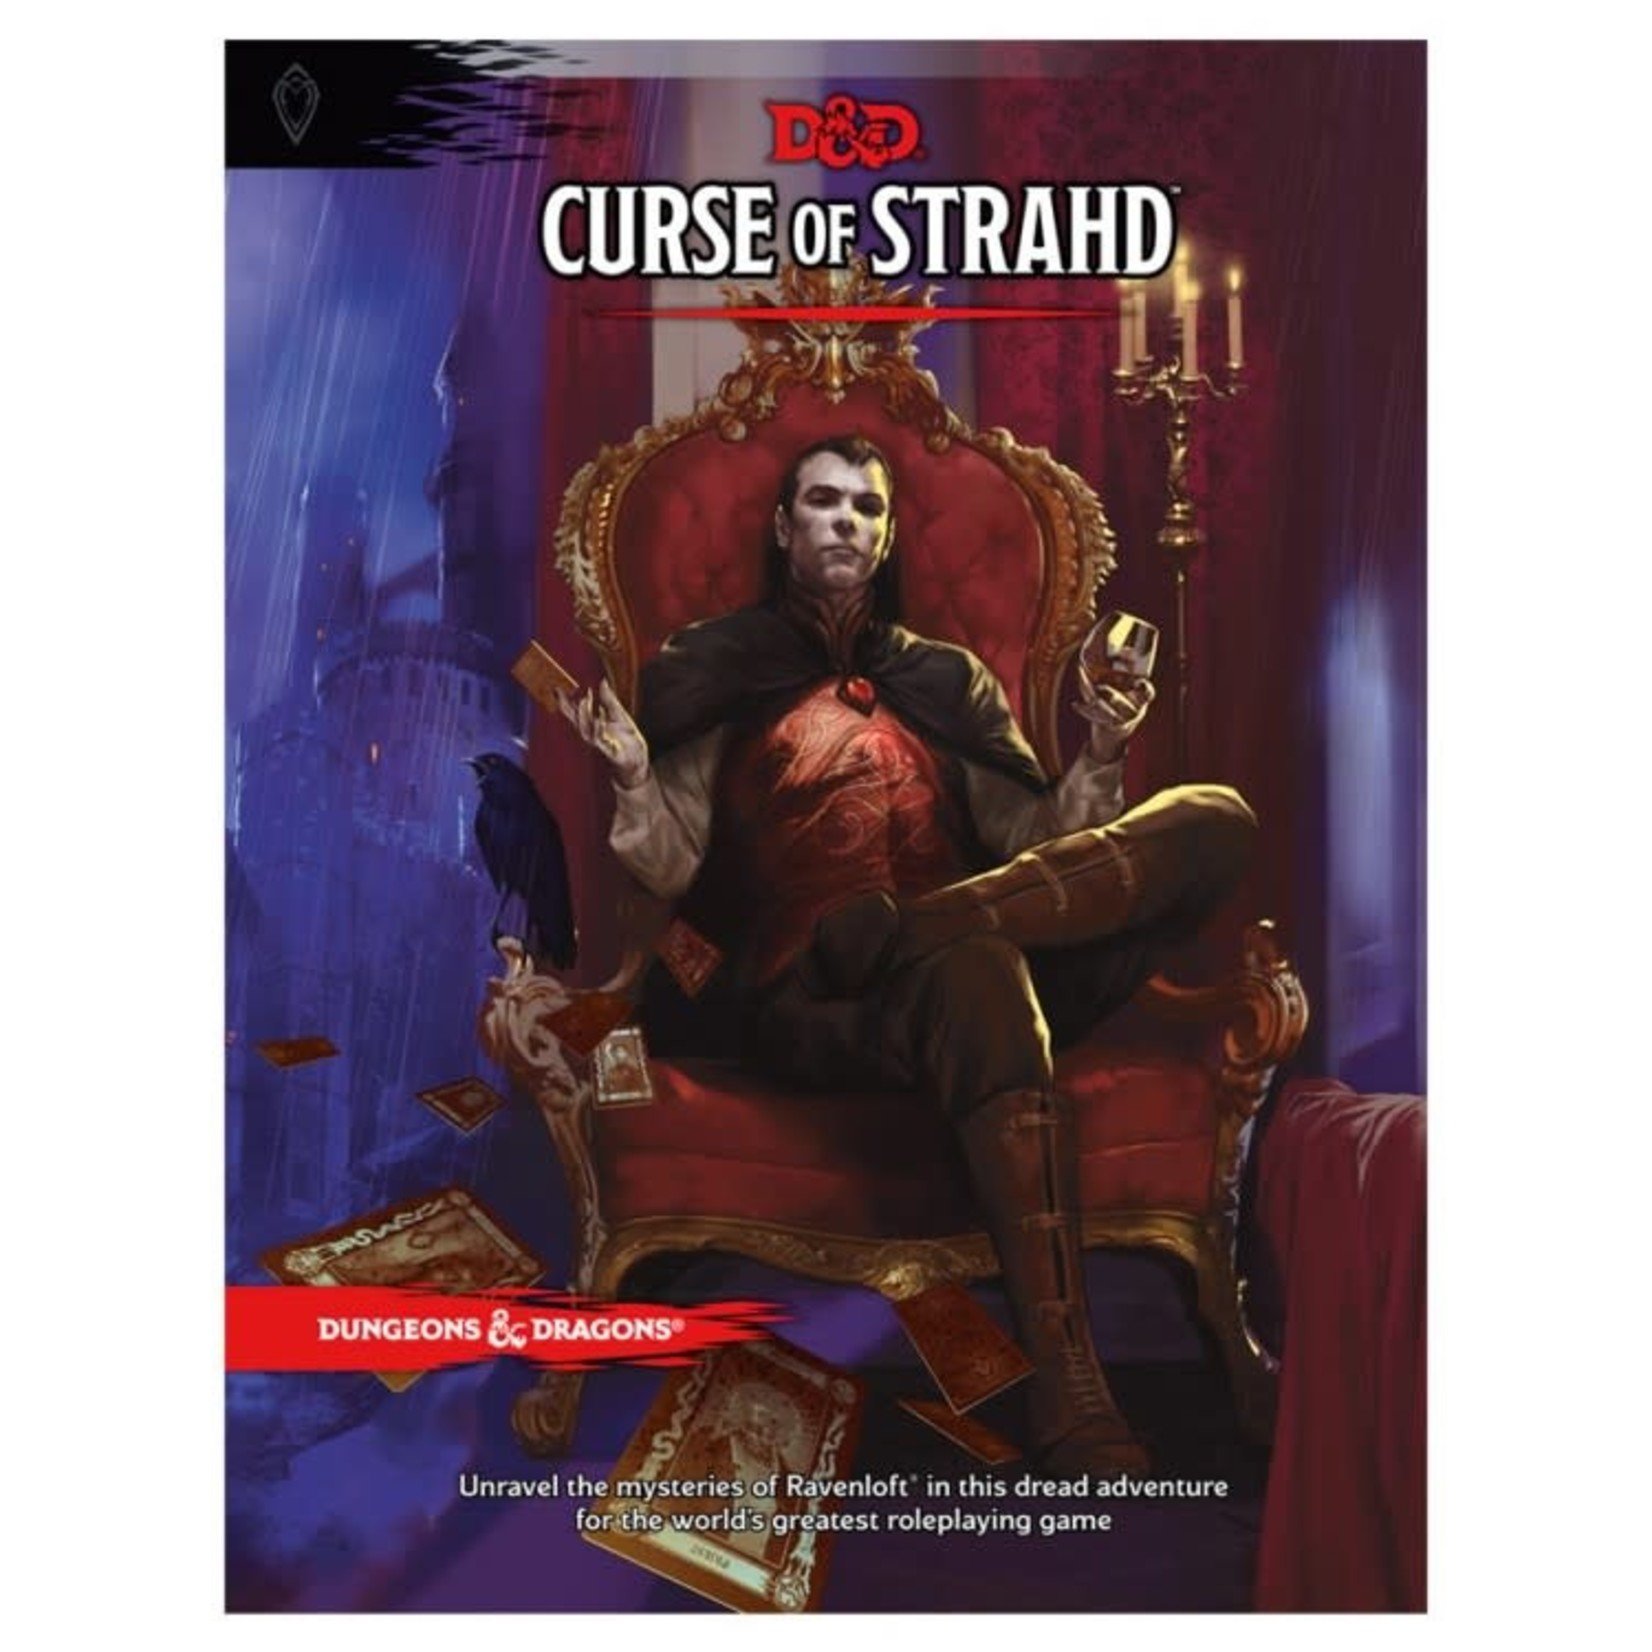 Dungeons & Dragons Dungeons & Dragons – Curse of Strahd (5th Edition)